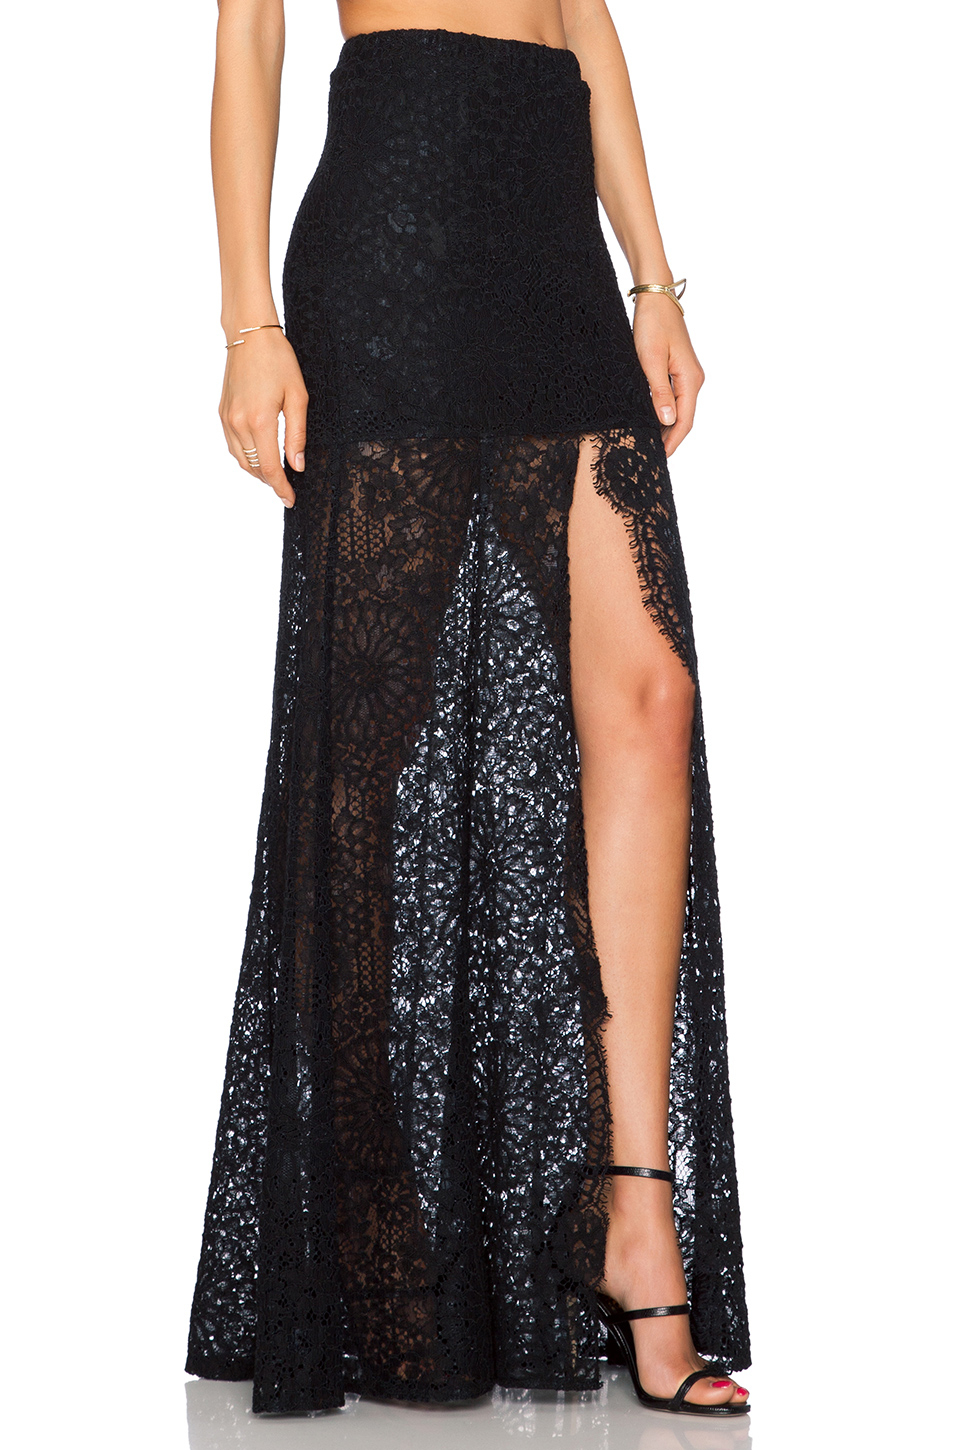 Lyst - Alexis Hermes Lace Maxi Skirt in Black